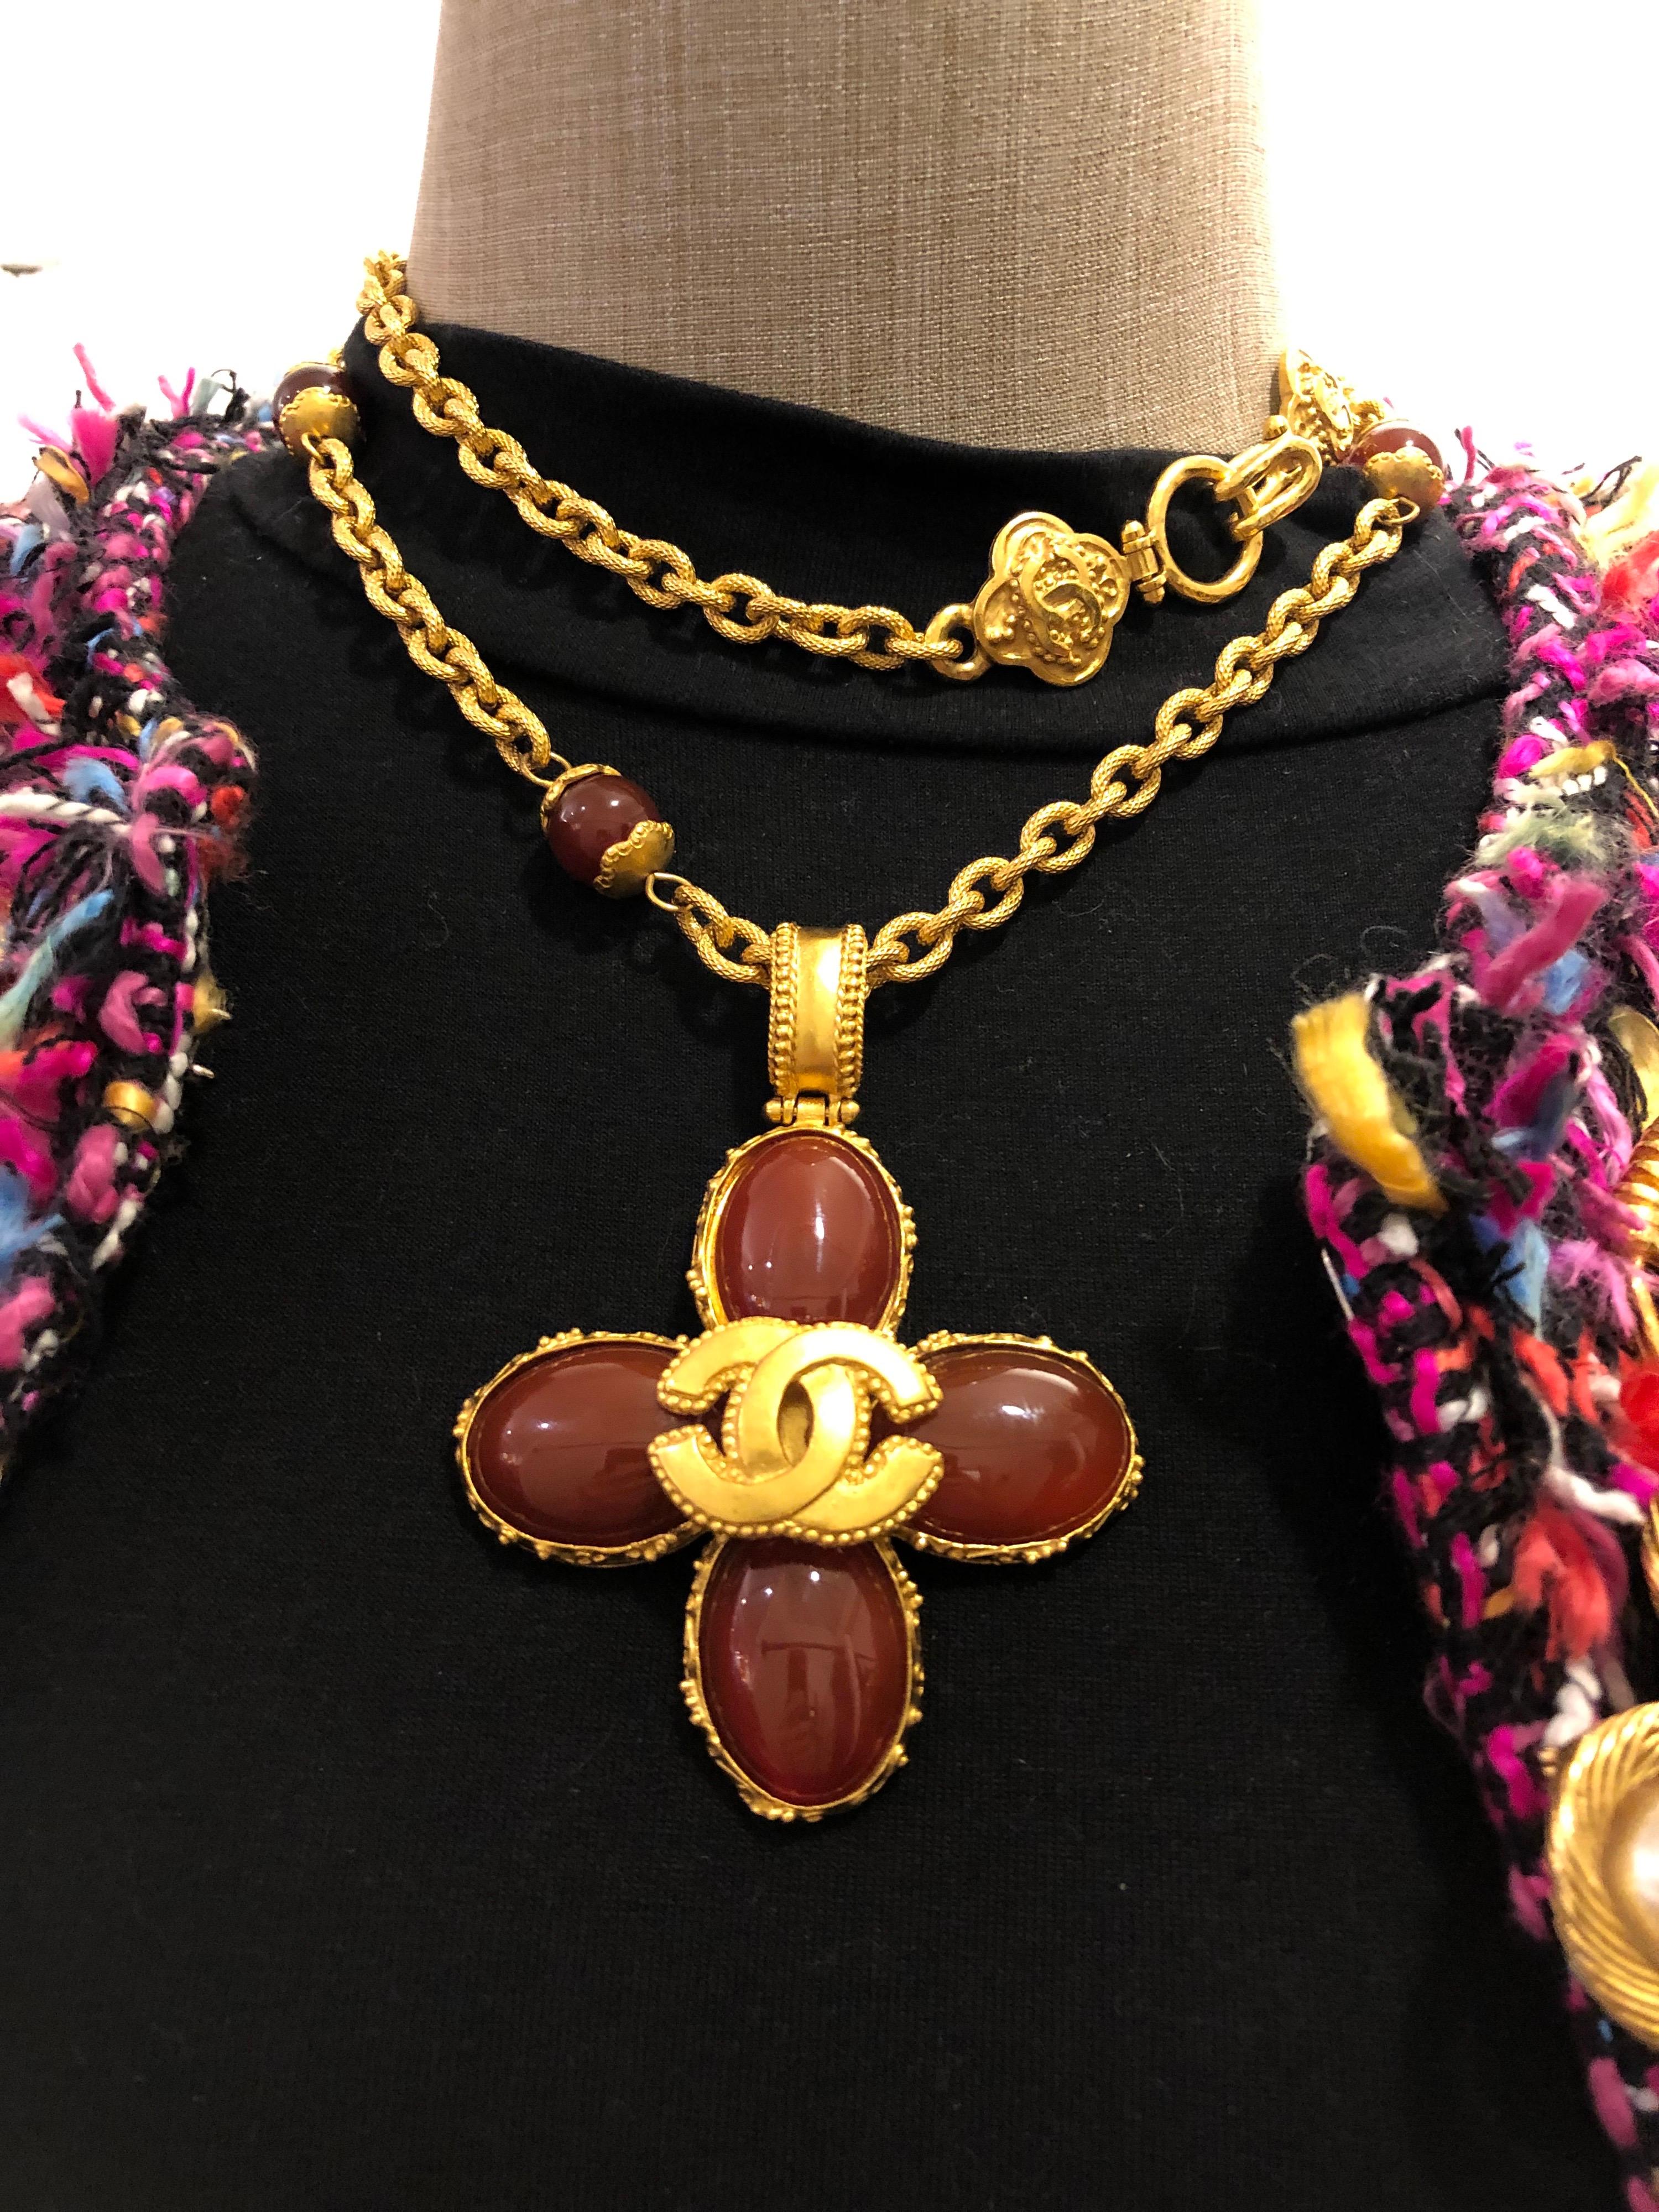 1990s Vintage CHANEL Gold Toned Red Carnelian Clover Chain Necklace  For Sale 4